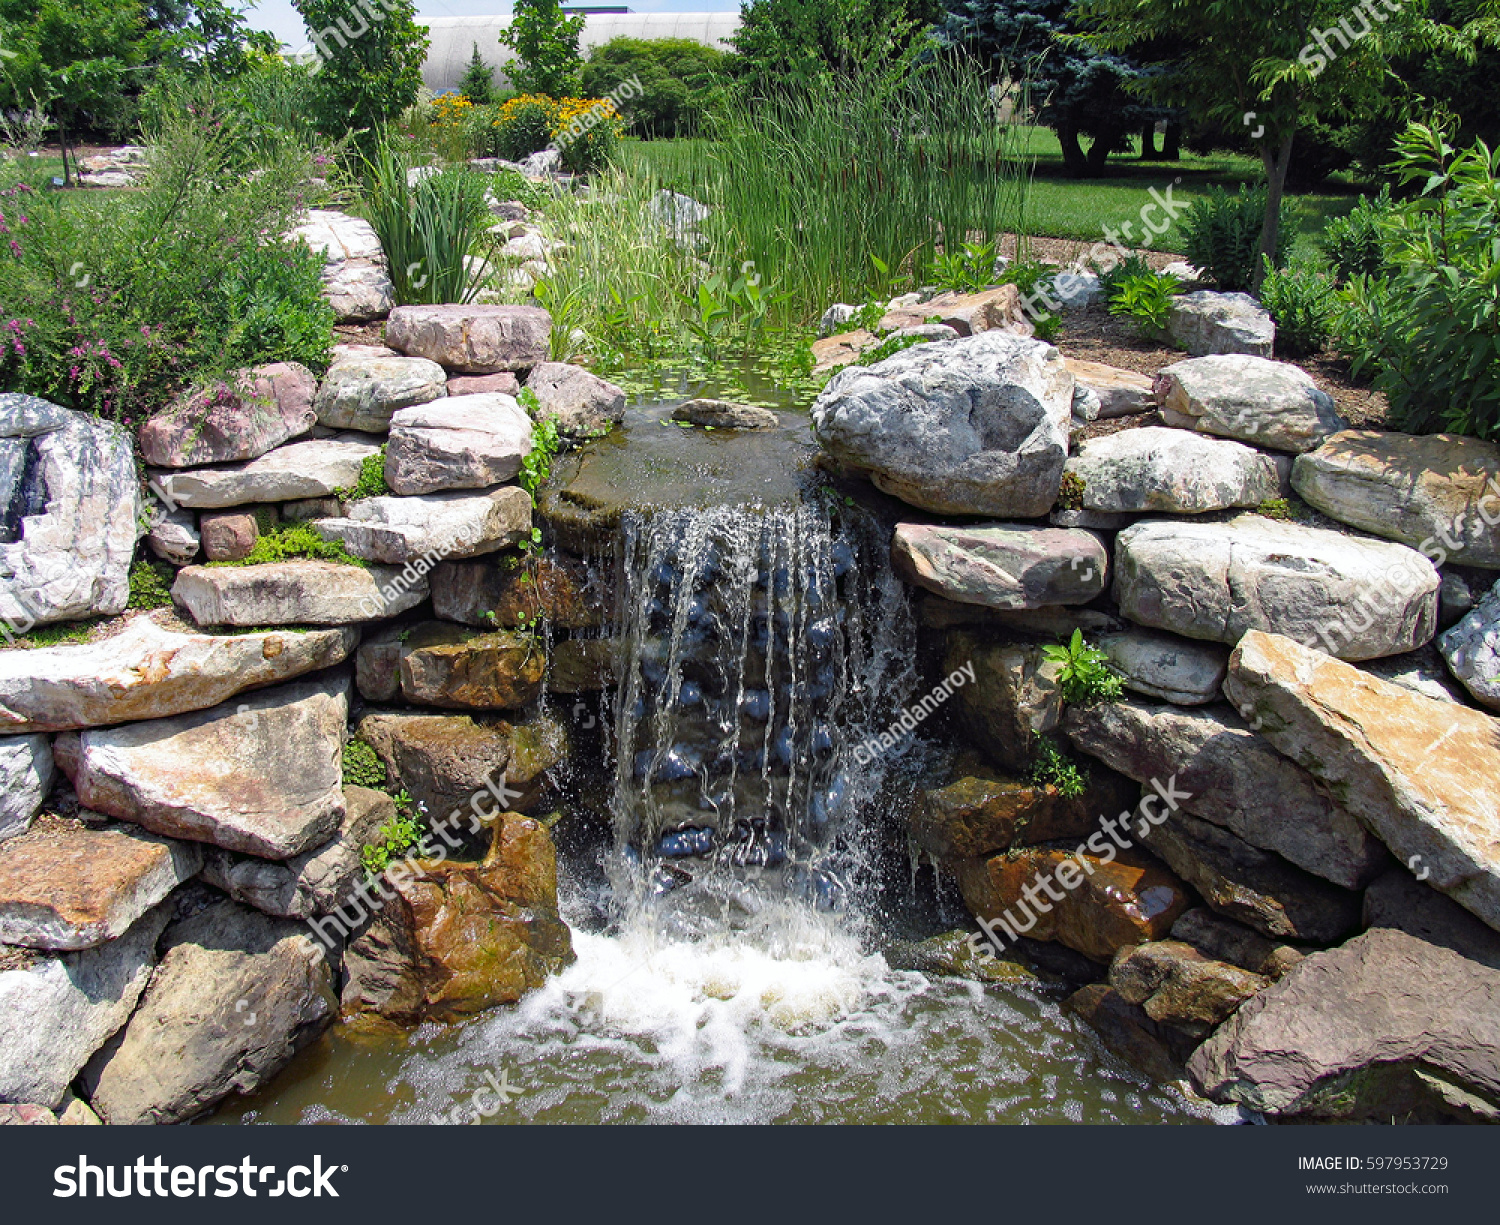 A lush green garden with waterfall cascading down the rocky stones #597953729